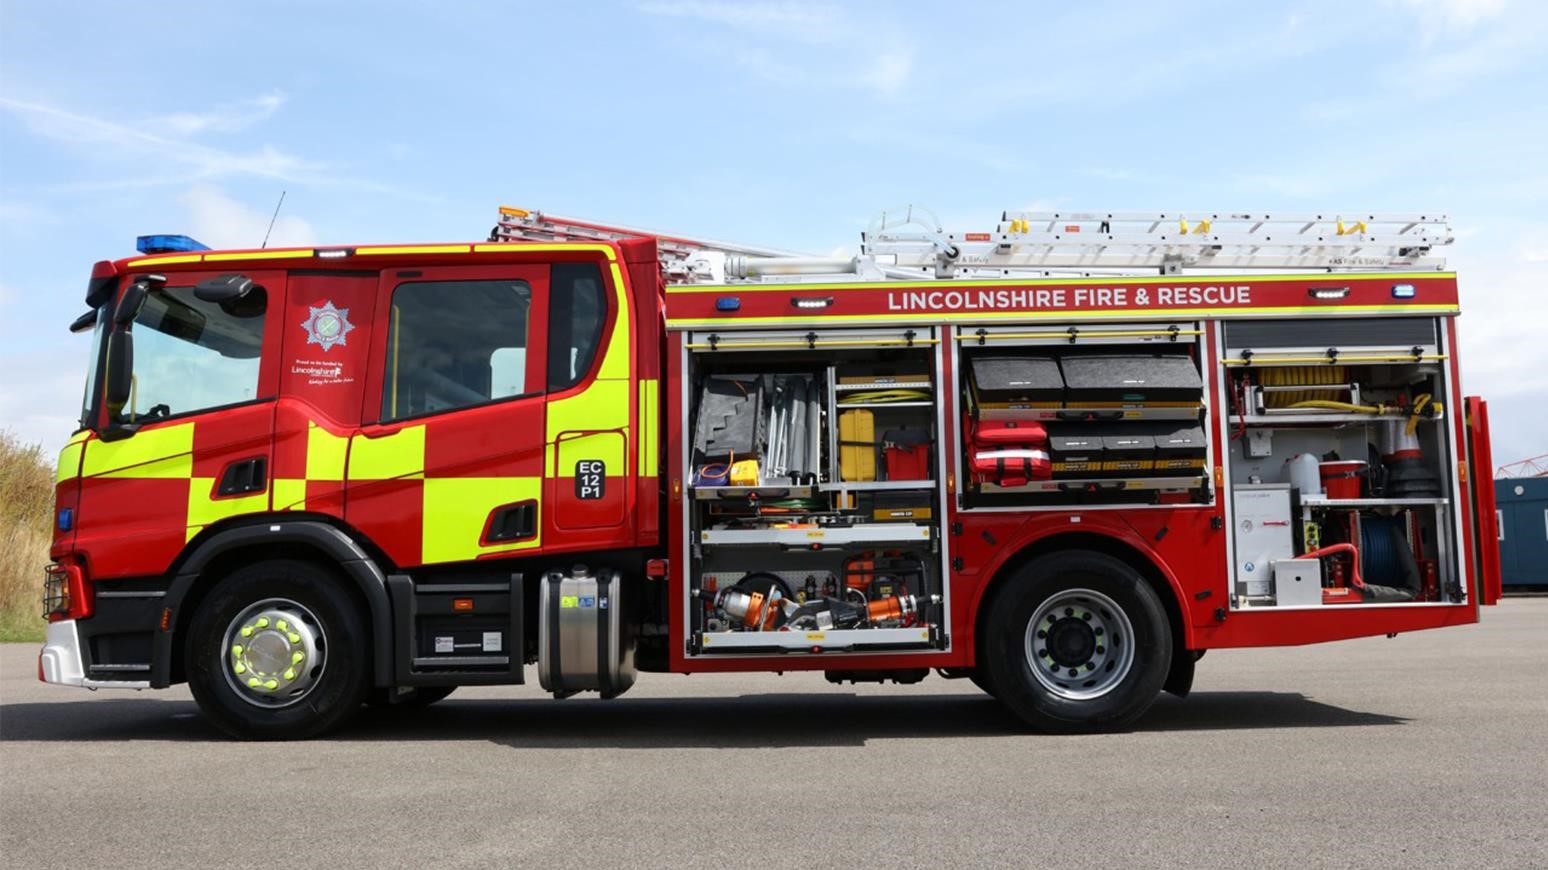 Lincolnshire Fire & Rescue Receives First Scania Fire Truck, One Of 33 To Come Over The Next Three Years